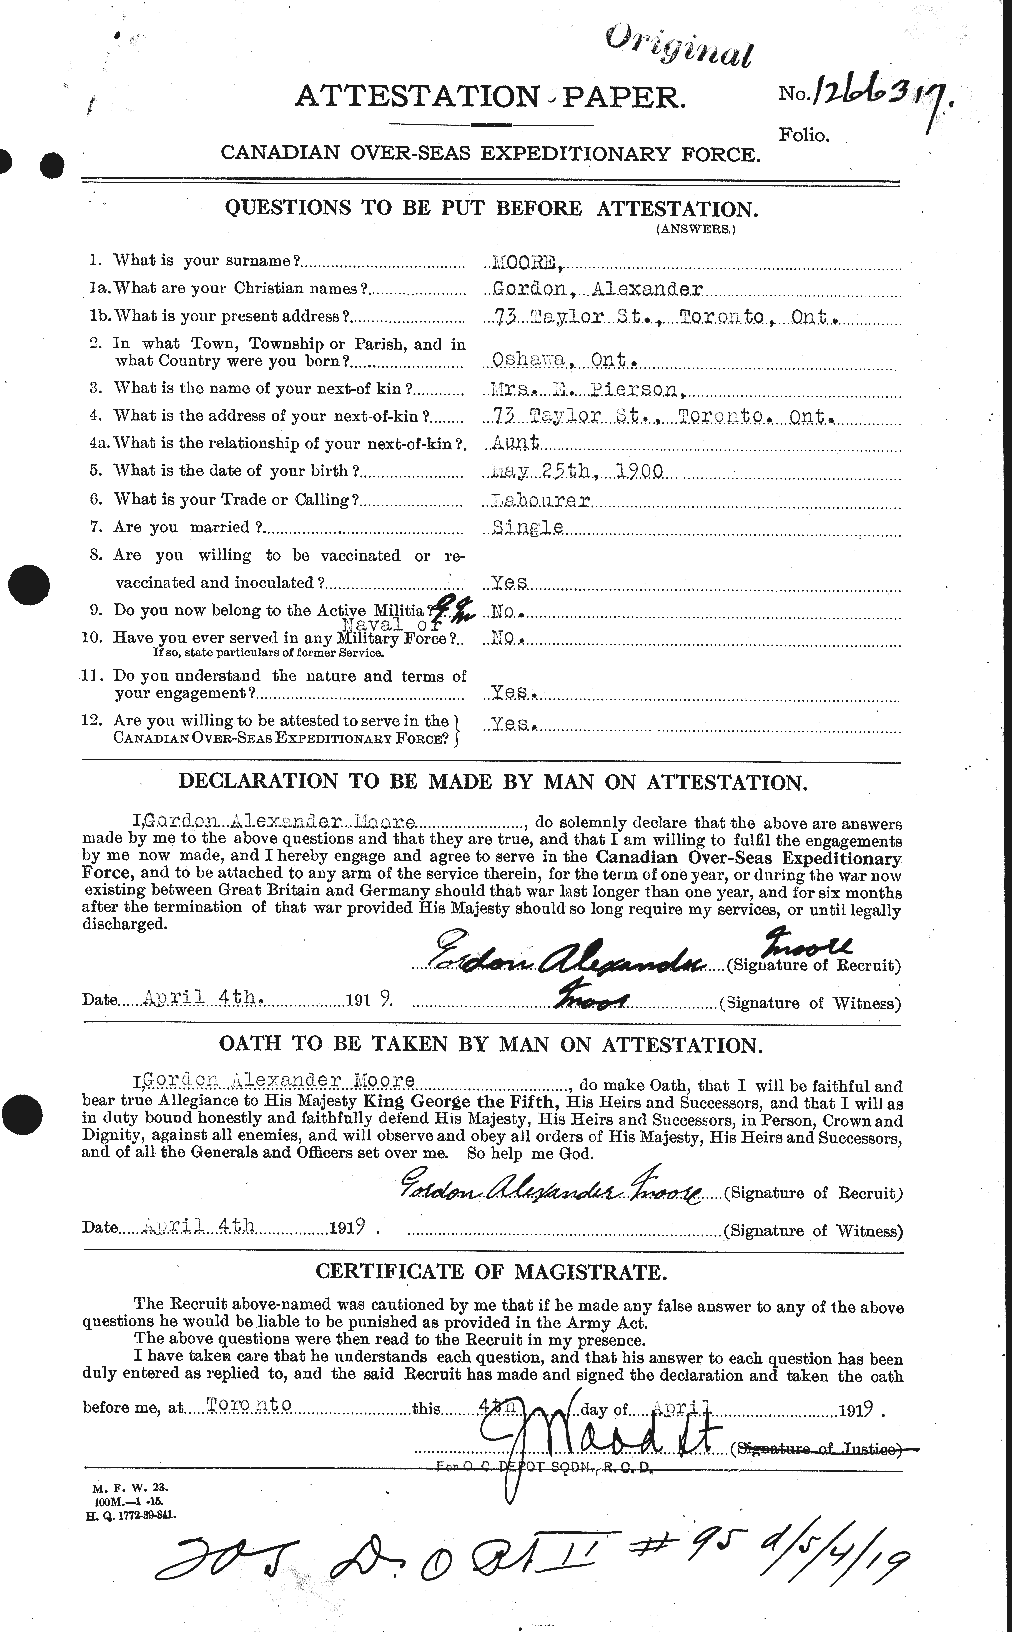 Personnel Records of the First World War - CEF 502044a